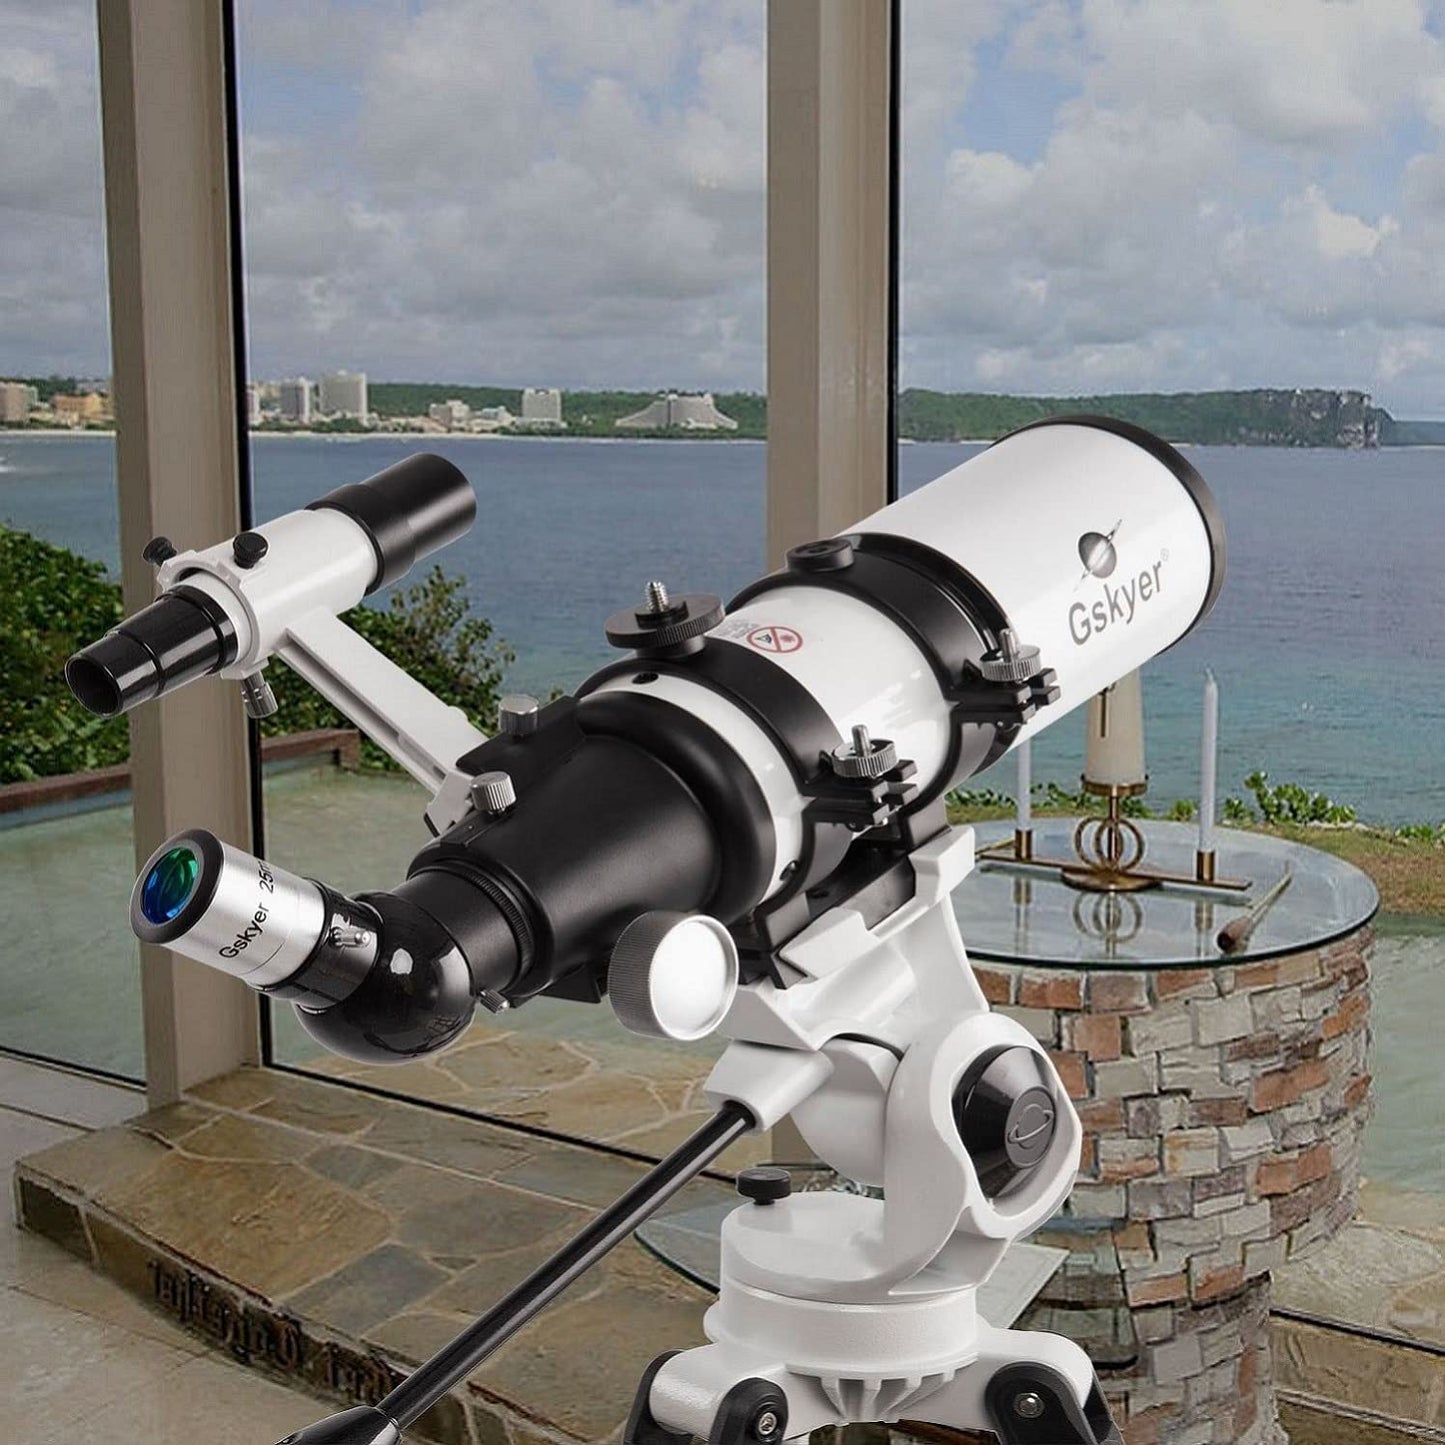 A Gskyer 80mm refractor telescope is inside a room pointing outwards towards the ocean.